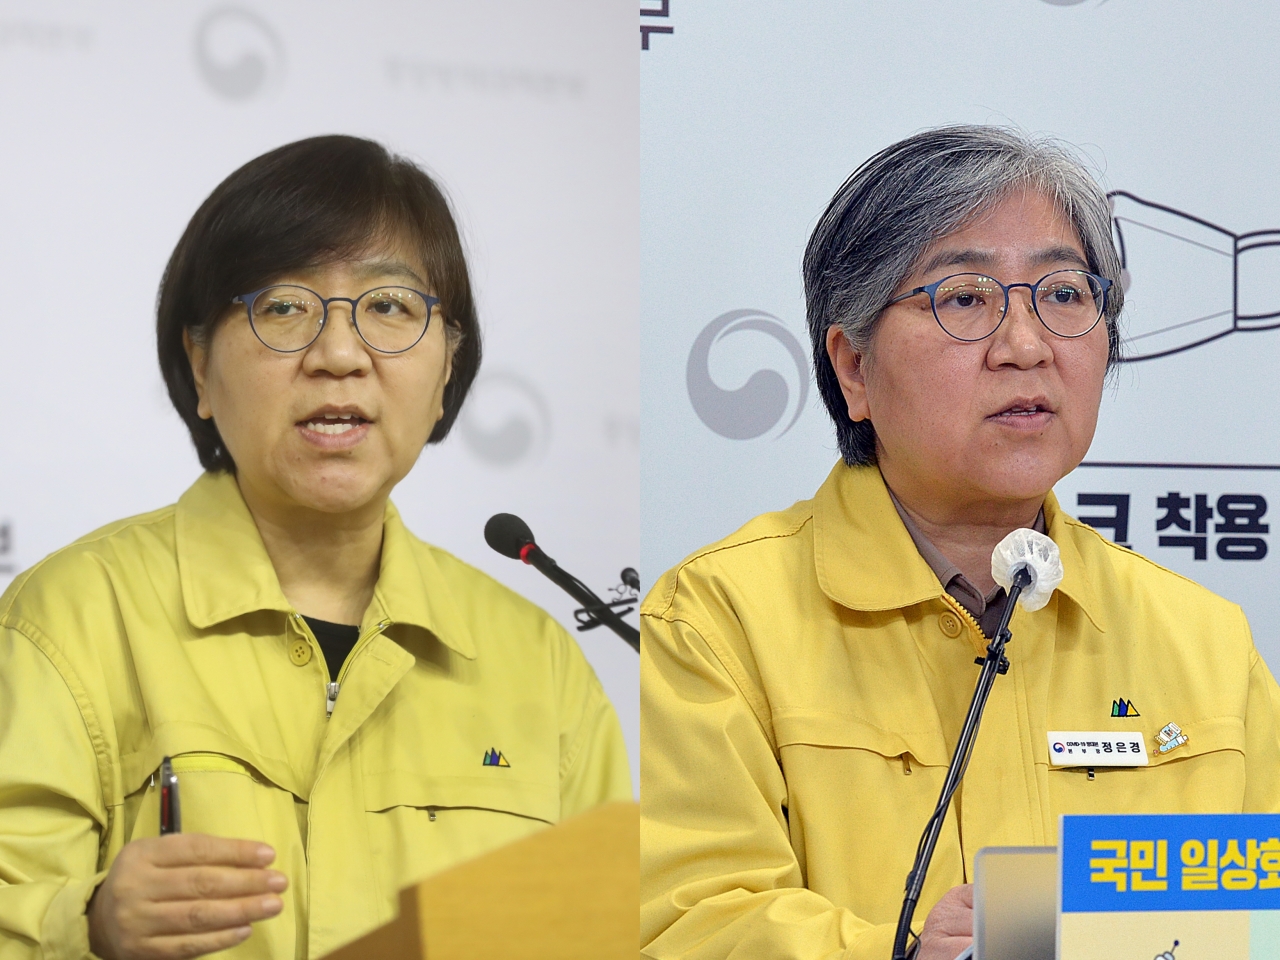 On the left: Jeong Eun-kyeong speaks at one of the early government COVID-19 briefings on Feb. 2, 2020. On the right: Jeong speaks during a briefing held Feb. 14. (KDCA)